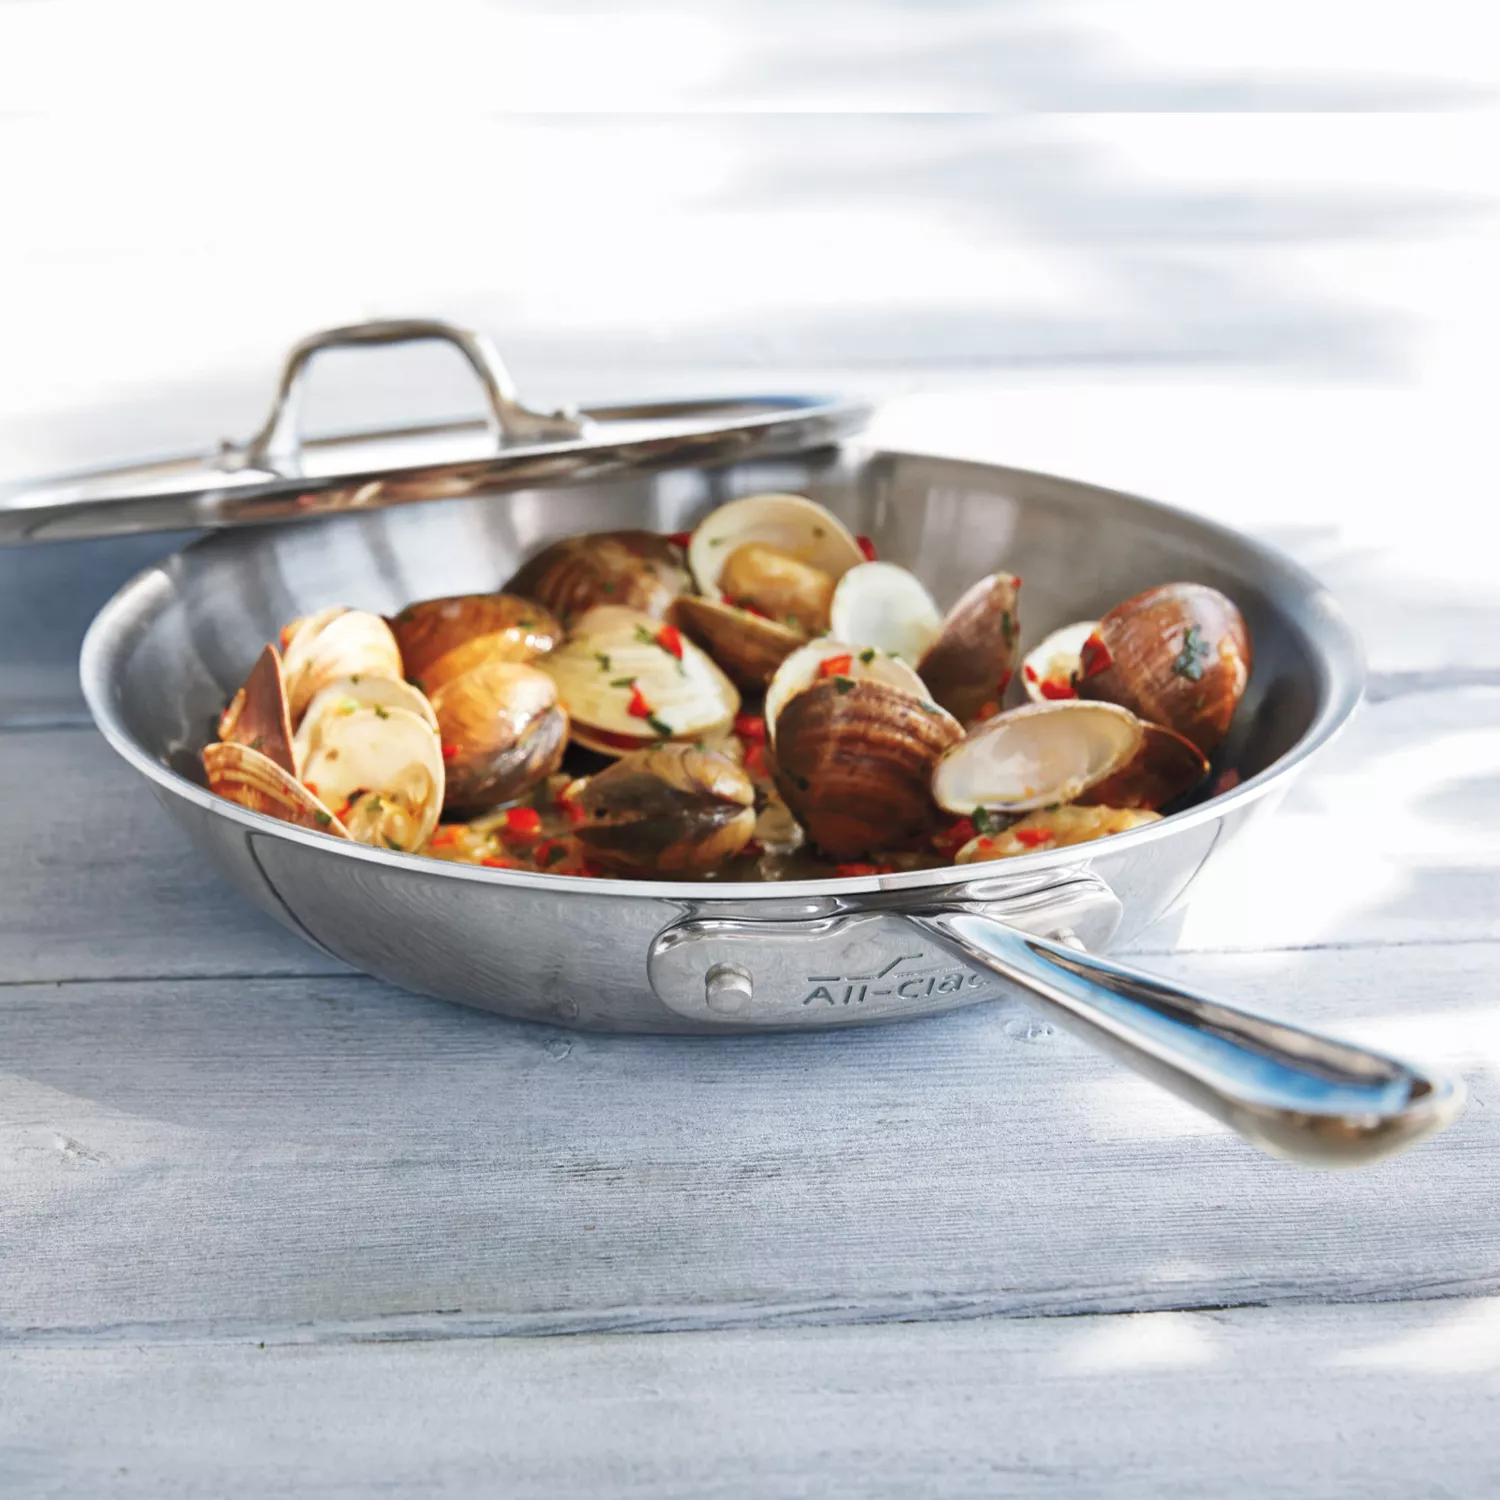 All-Clad D3 Stainless Steel 3-Ply Bonded 12- inch Fry-Pan with lid